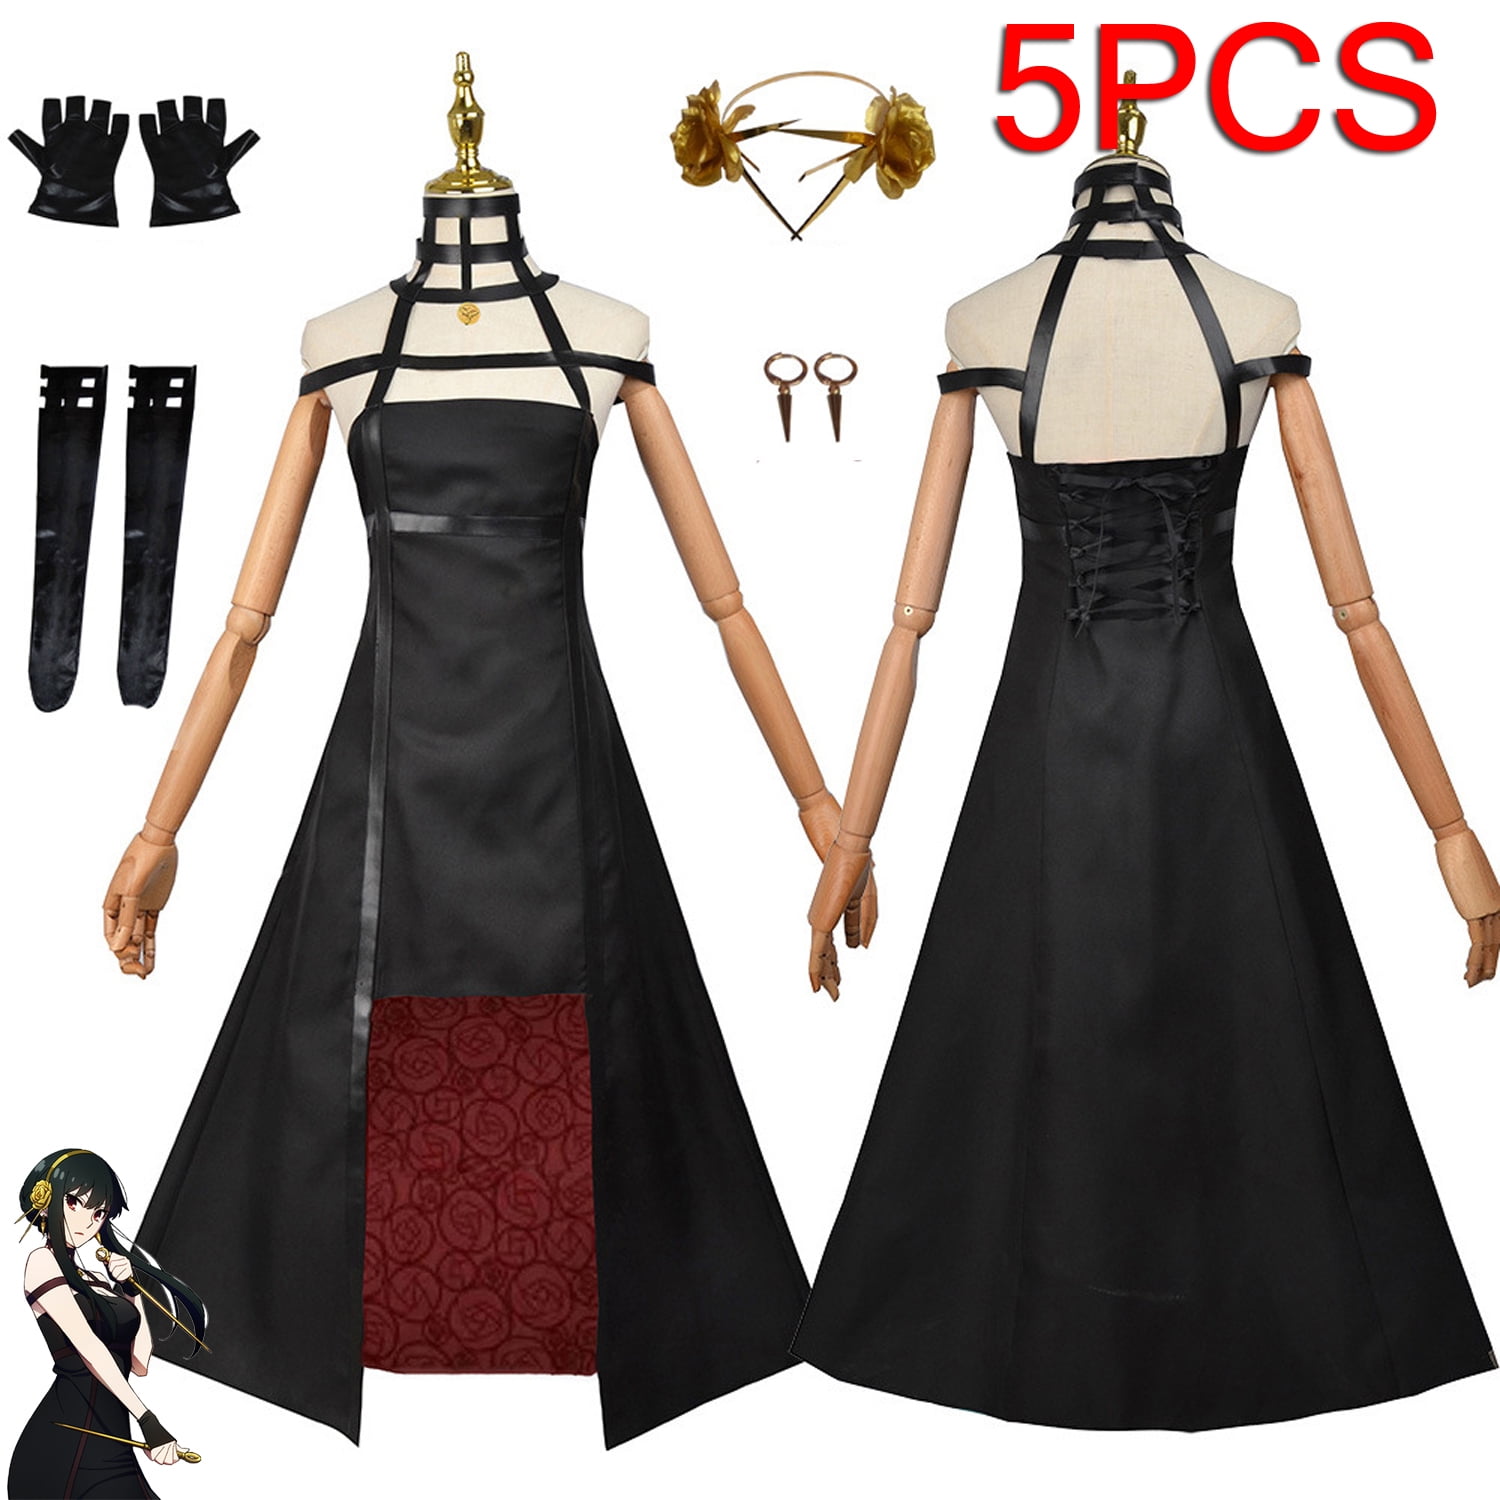 CLOSED Outfit Adoptable 1  Dress sketches Anime dress Fashion design  sketches